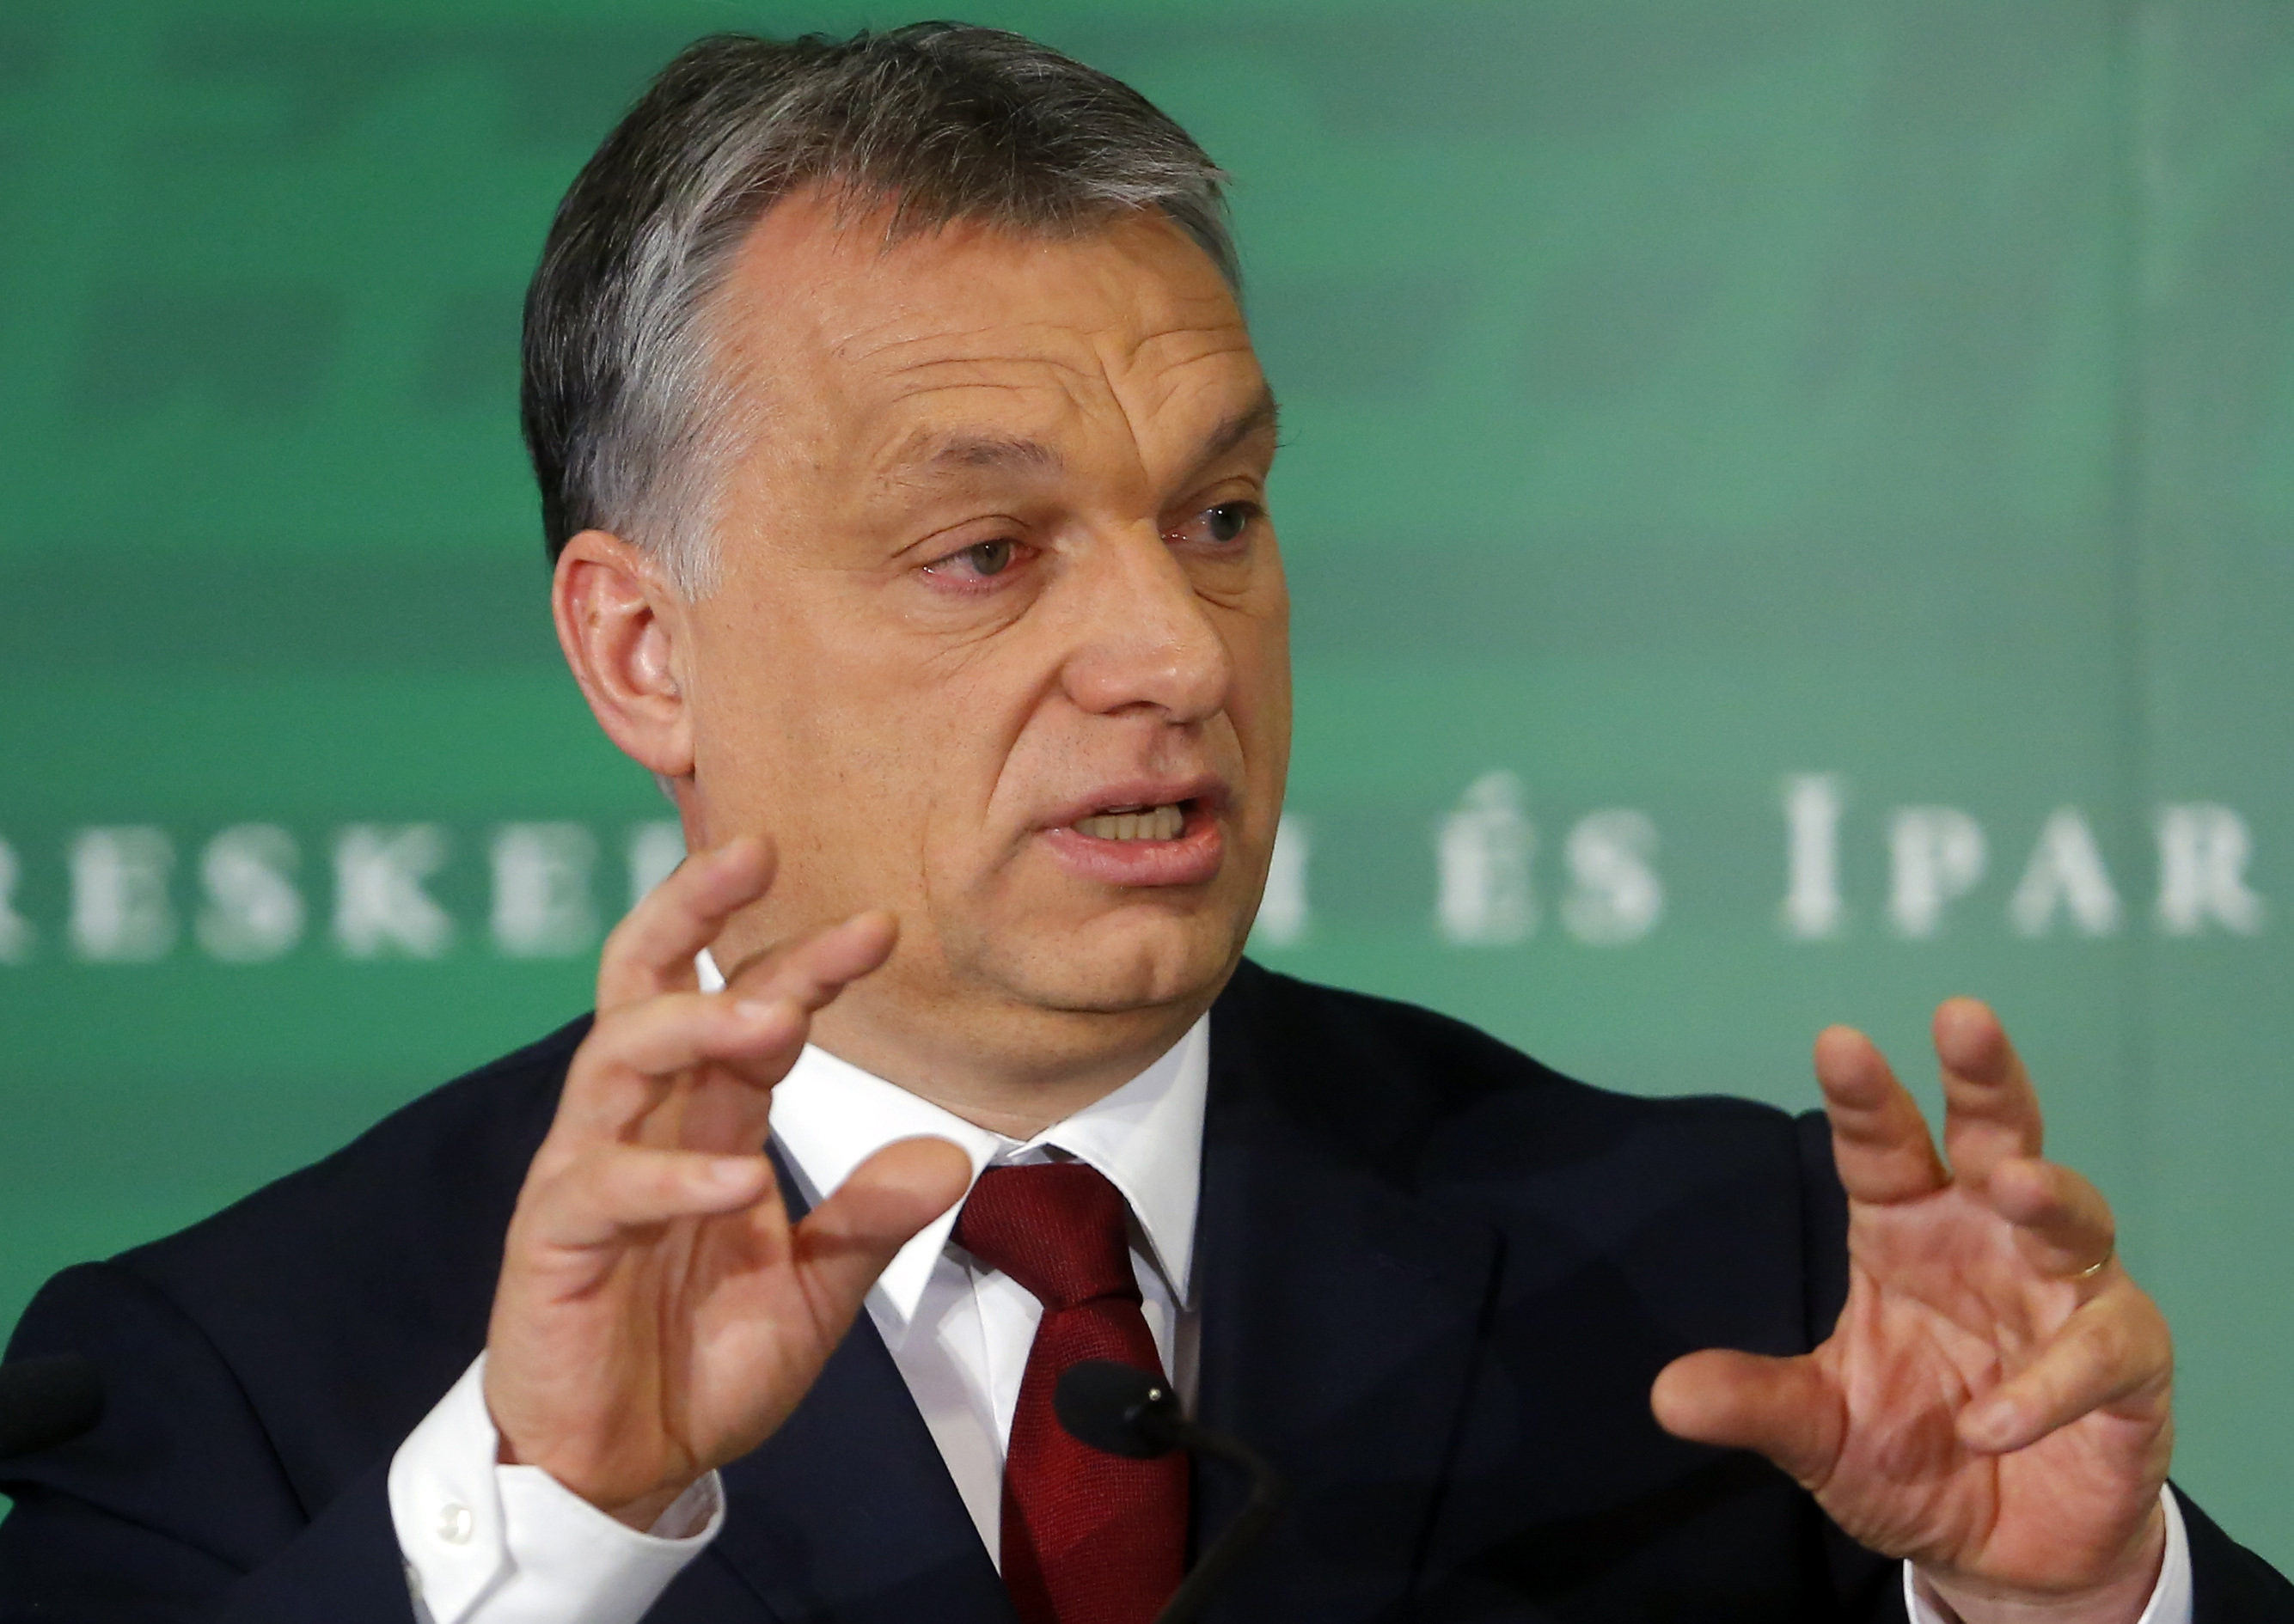 Hungarian Prime Minister Orban delivers a speech during a business conference in Budapest